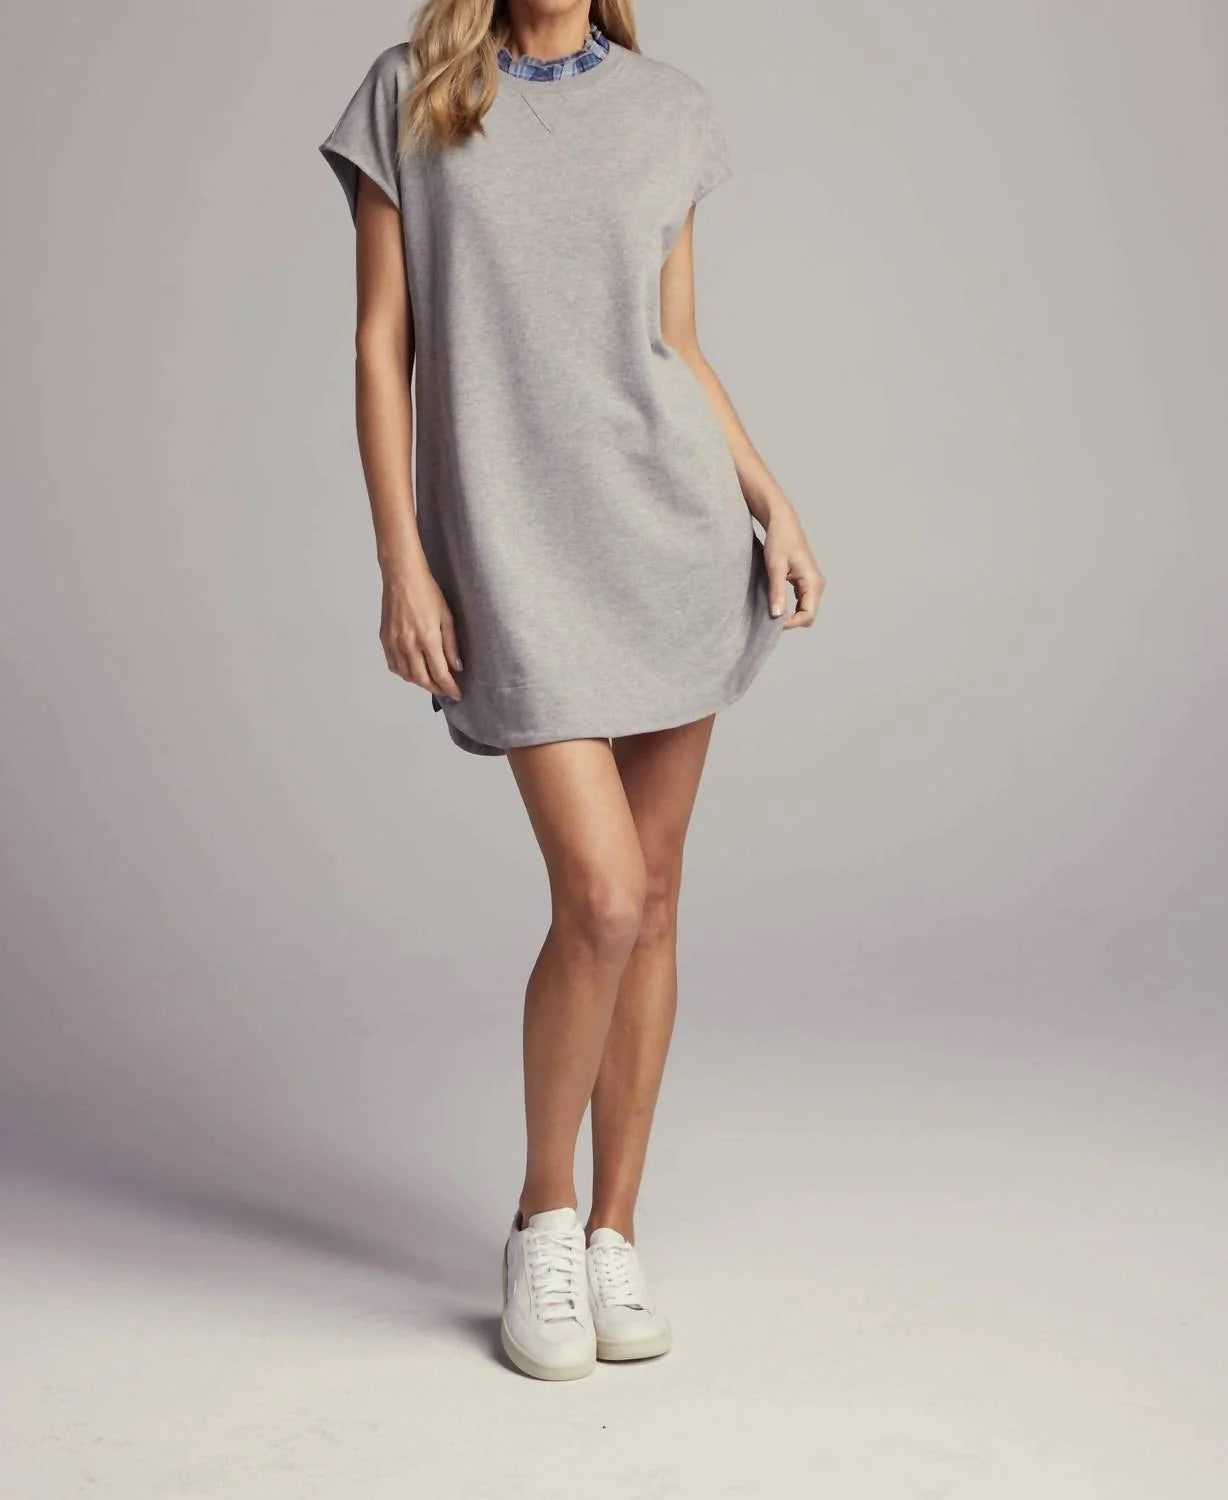 We Are Sundays Rossy Dress in Heather Grey